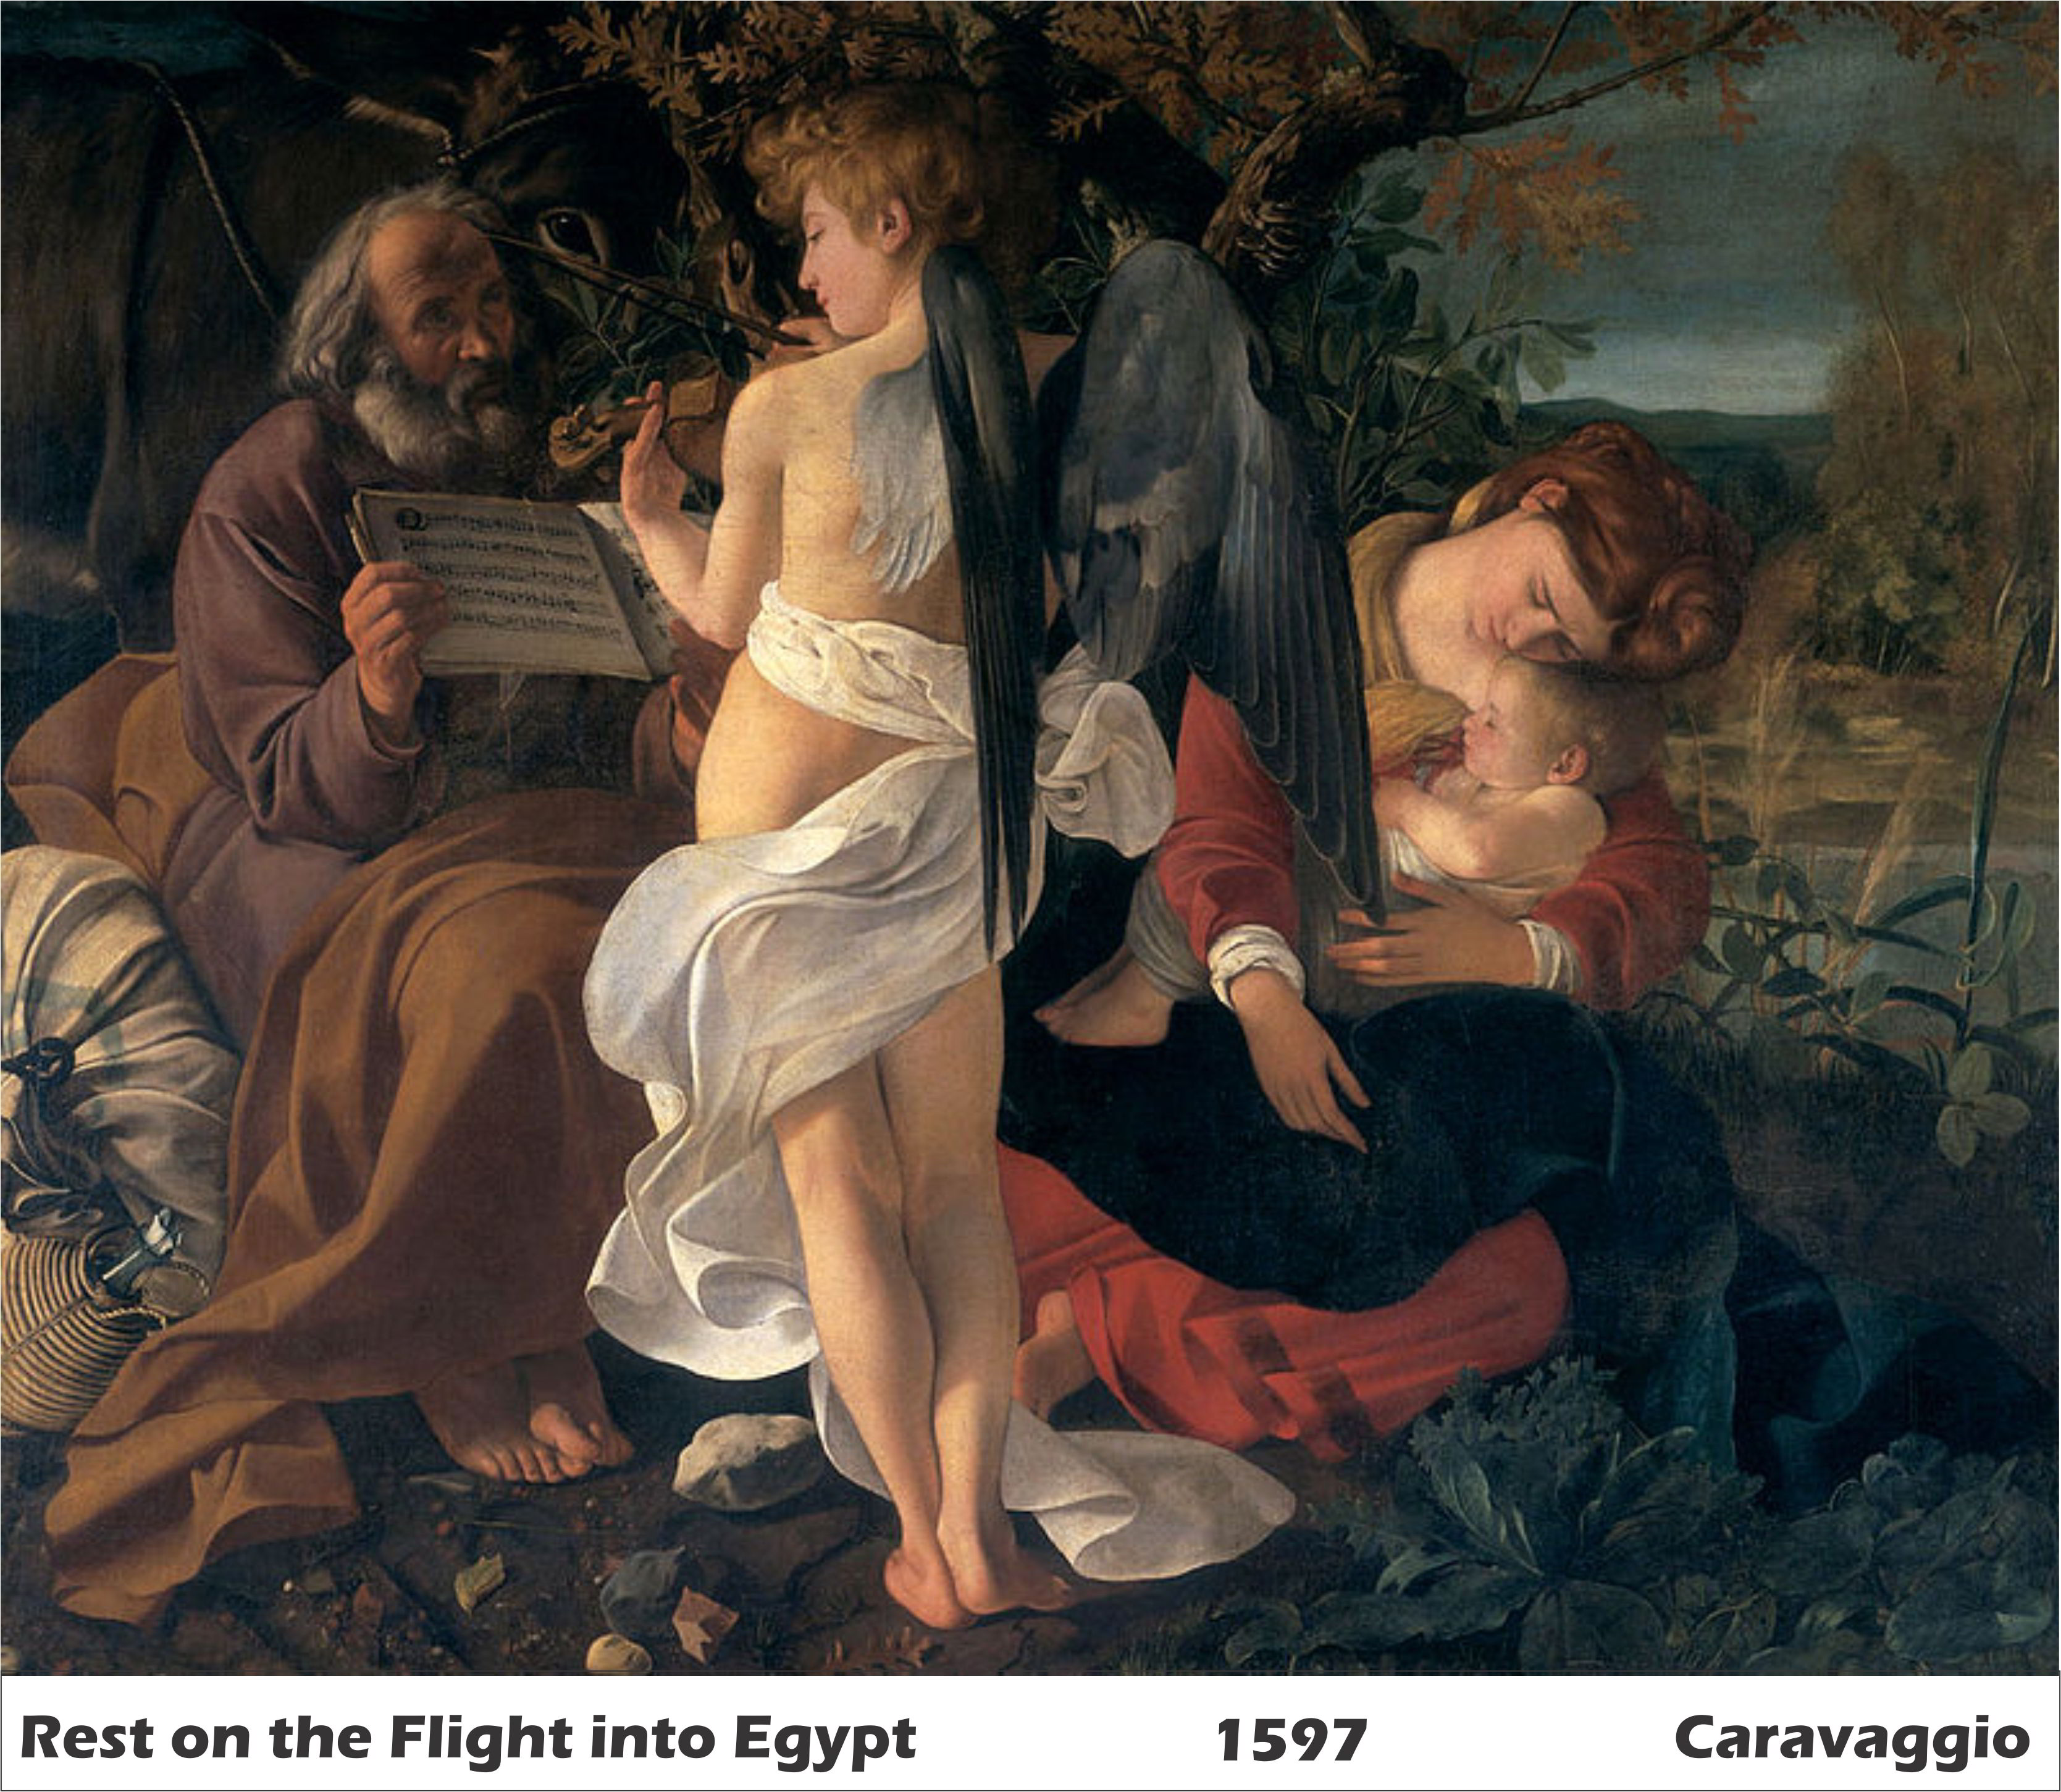 Rest on the Flight into Egypt by Caravaggio